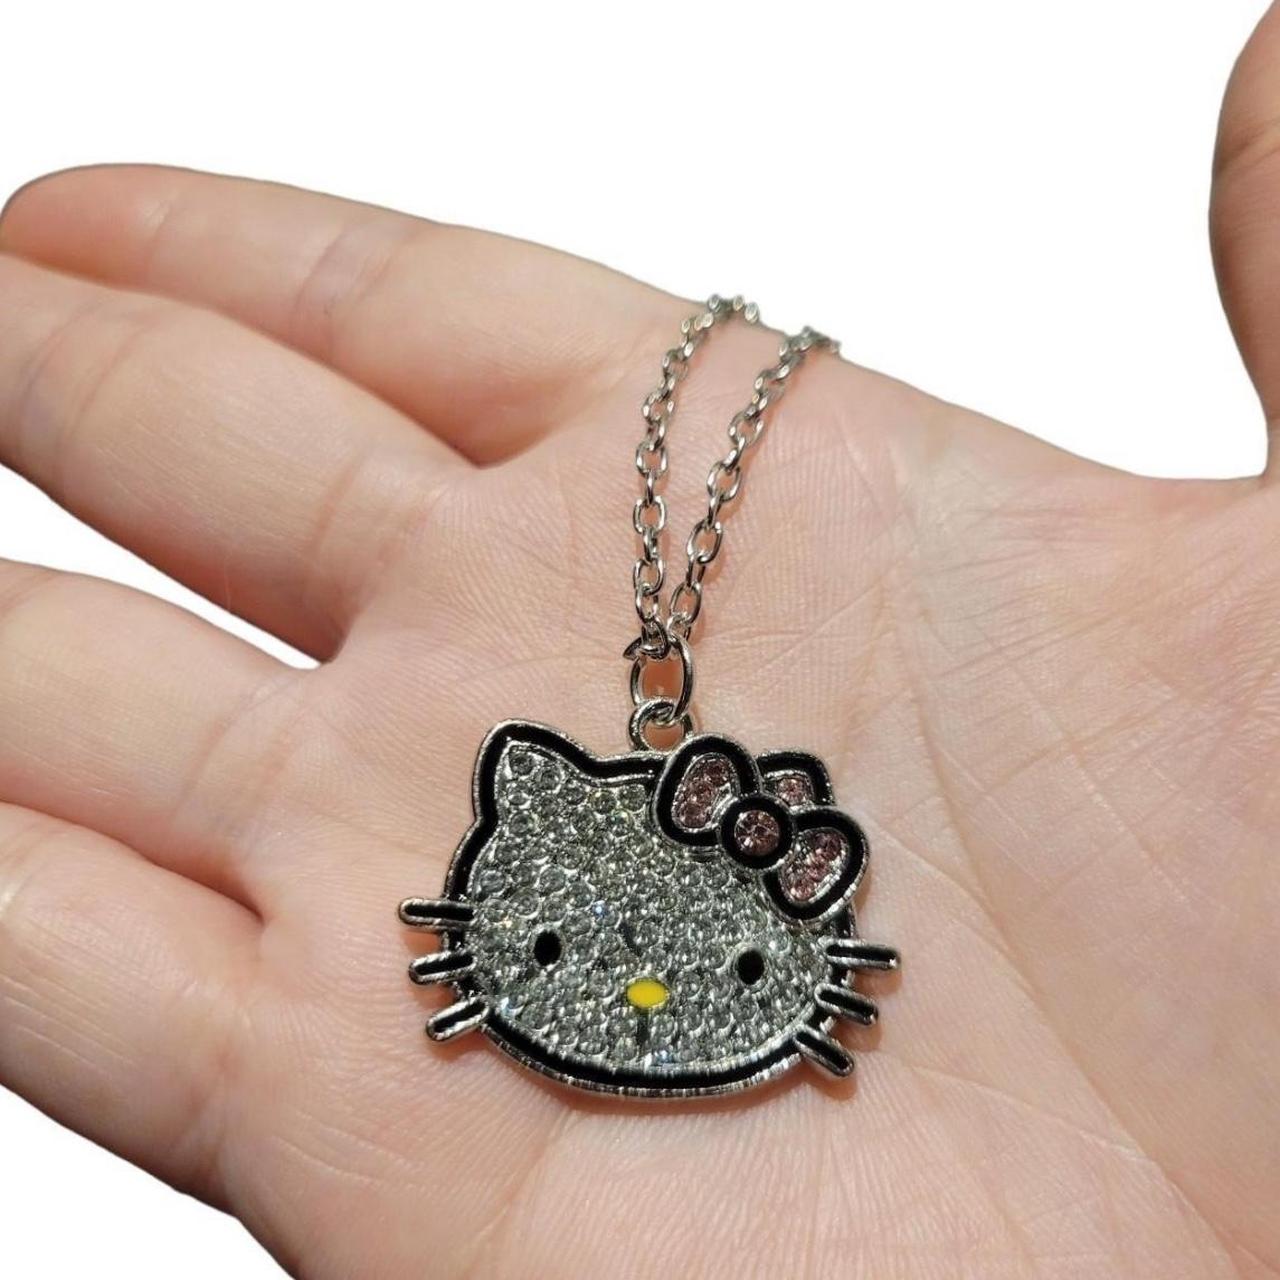 Best Brand New Rare Hello Kitty Sitting Rhinestone Necklace for sale in  Mandeville, Louisiana for 2024